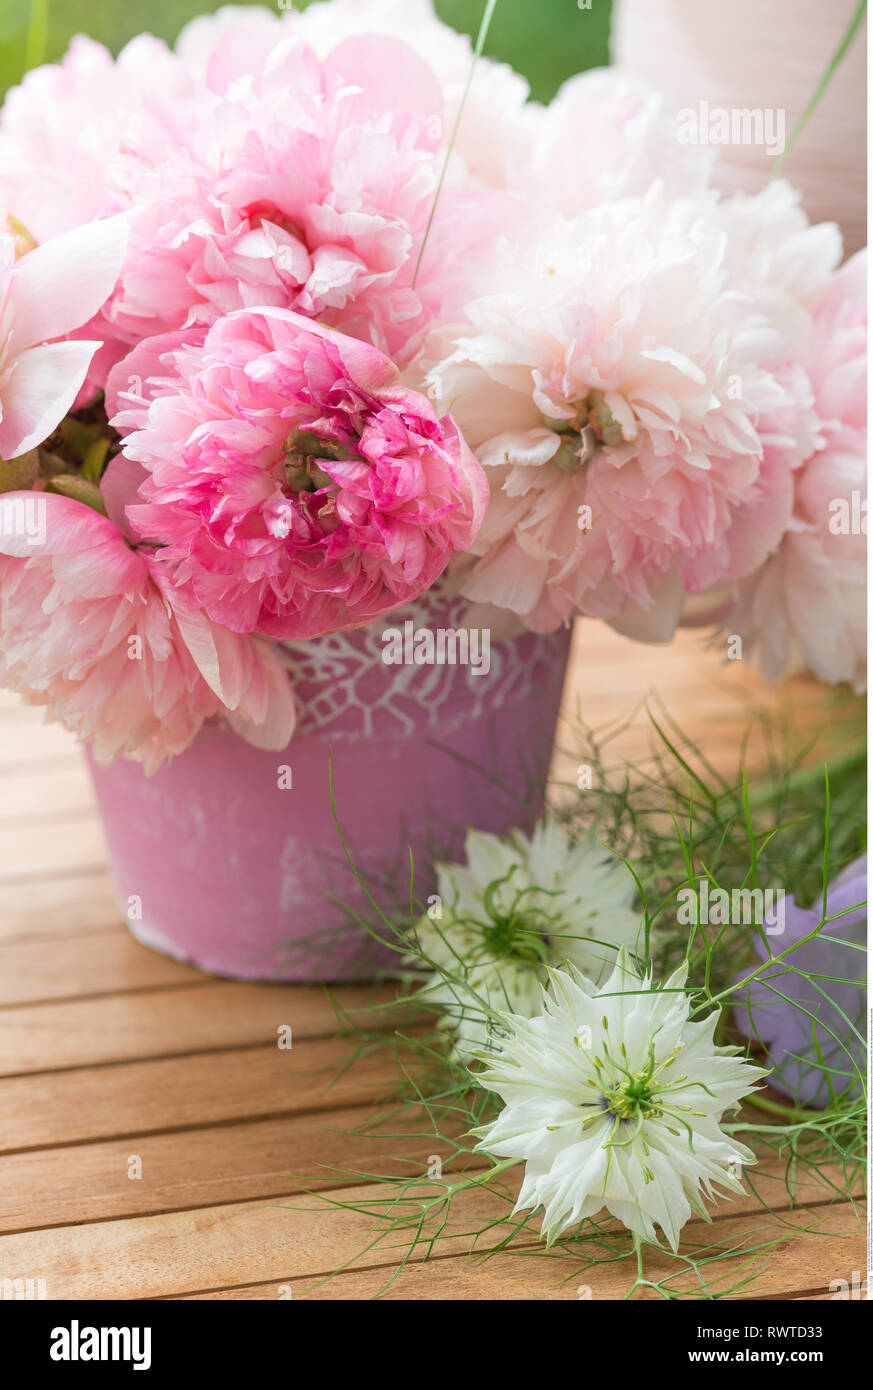 botany, deco with peony blossoms, Caution! For Greetingcard-Use / Postcard-Use In German Speaking Countries Certain Restrictions May Apply Stock Photo